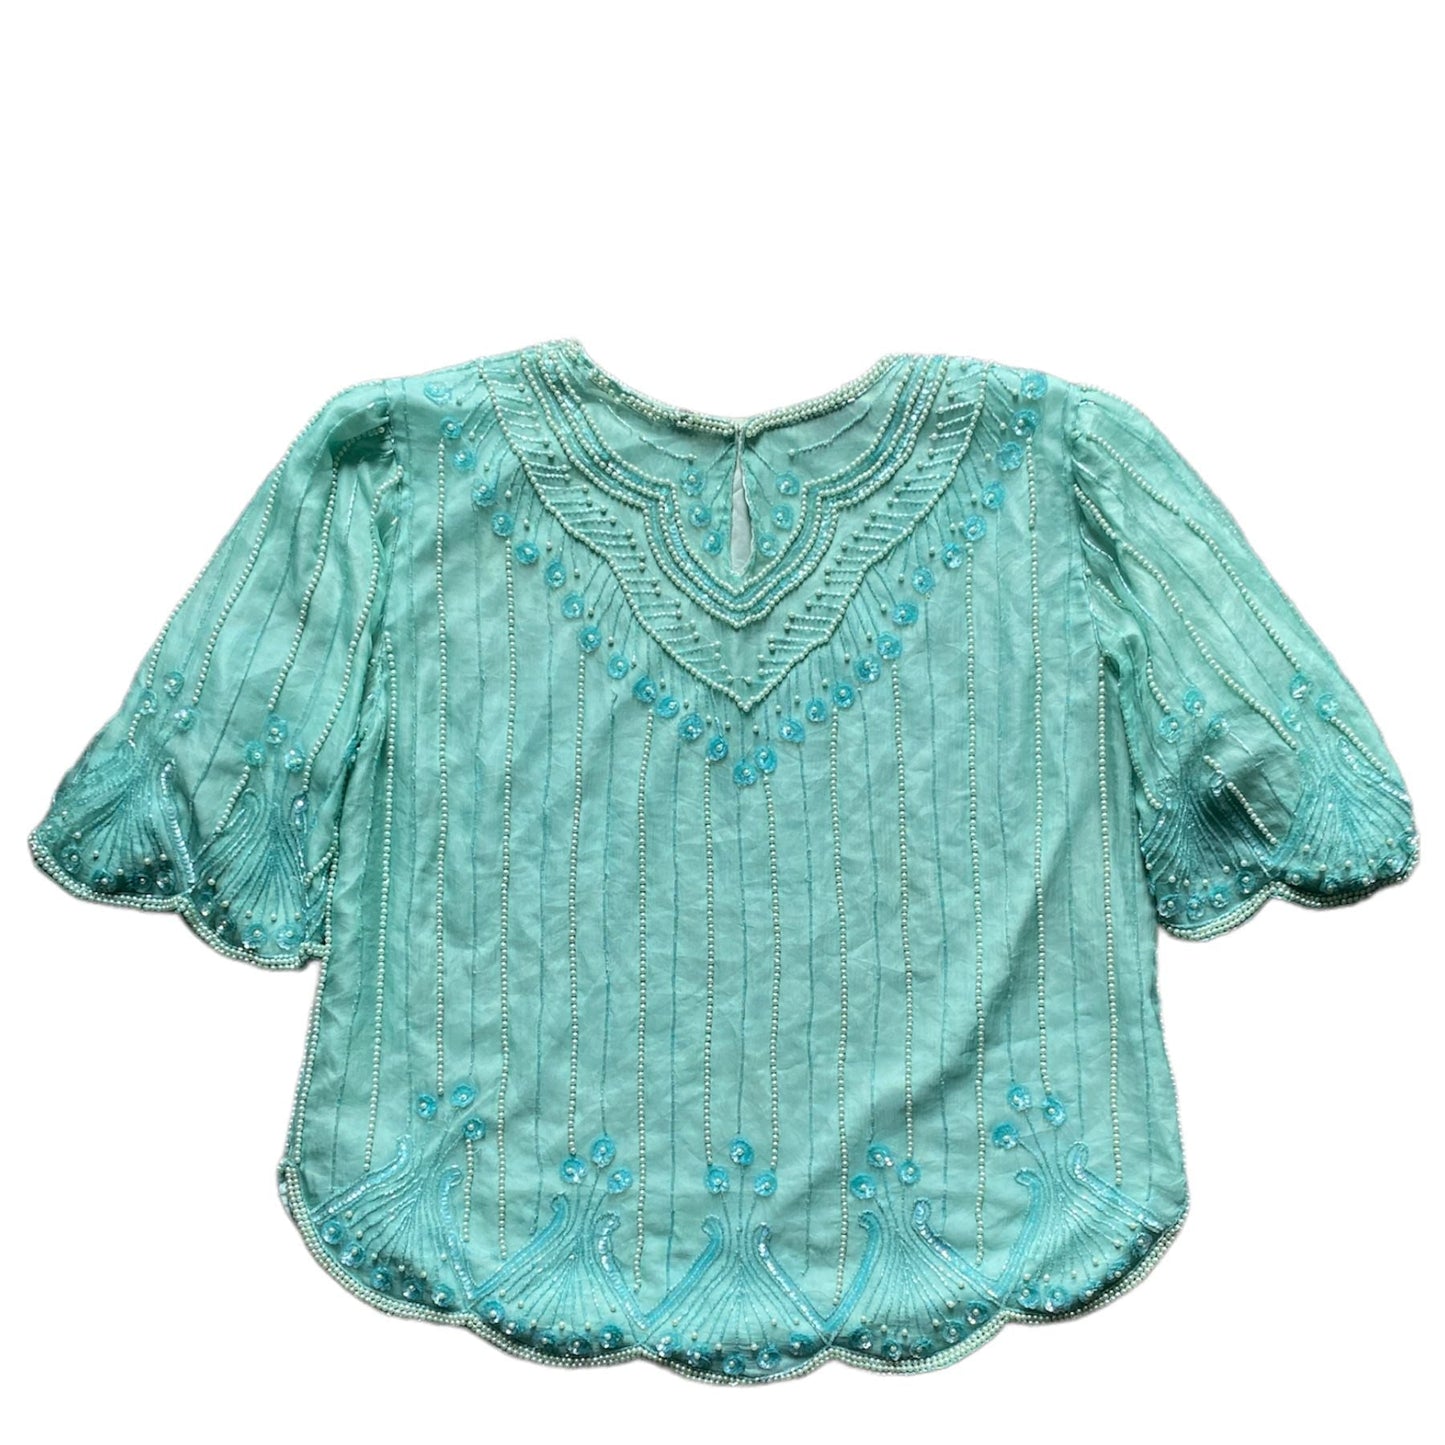 Sequined Top Blouse Oversized Fashion Aftermath